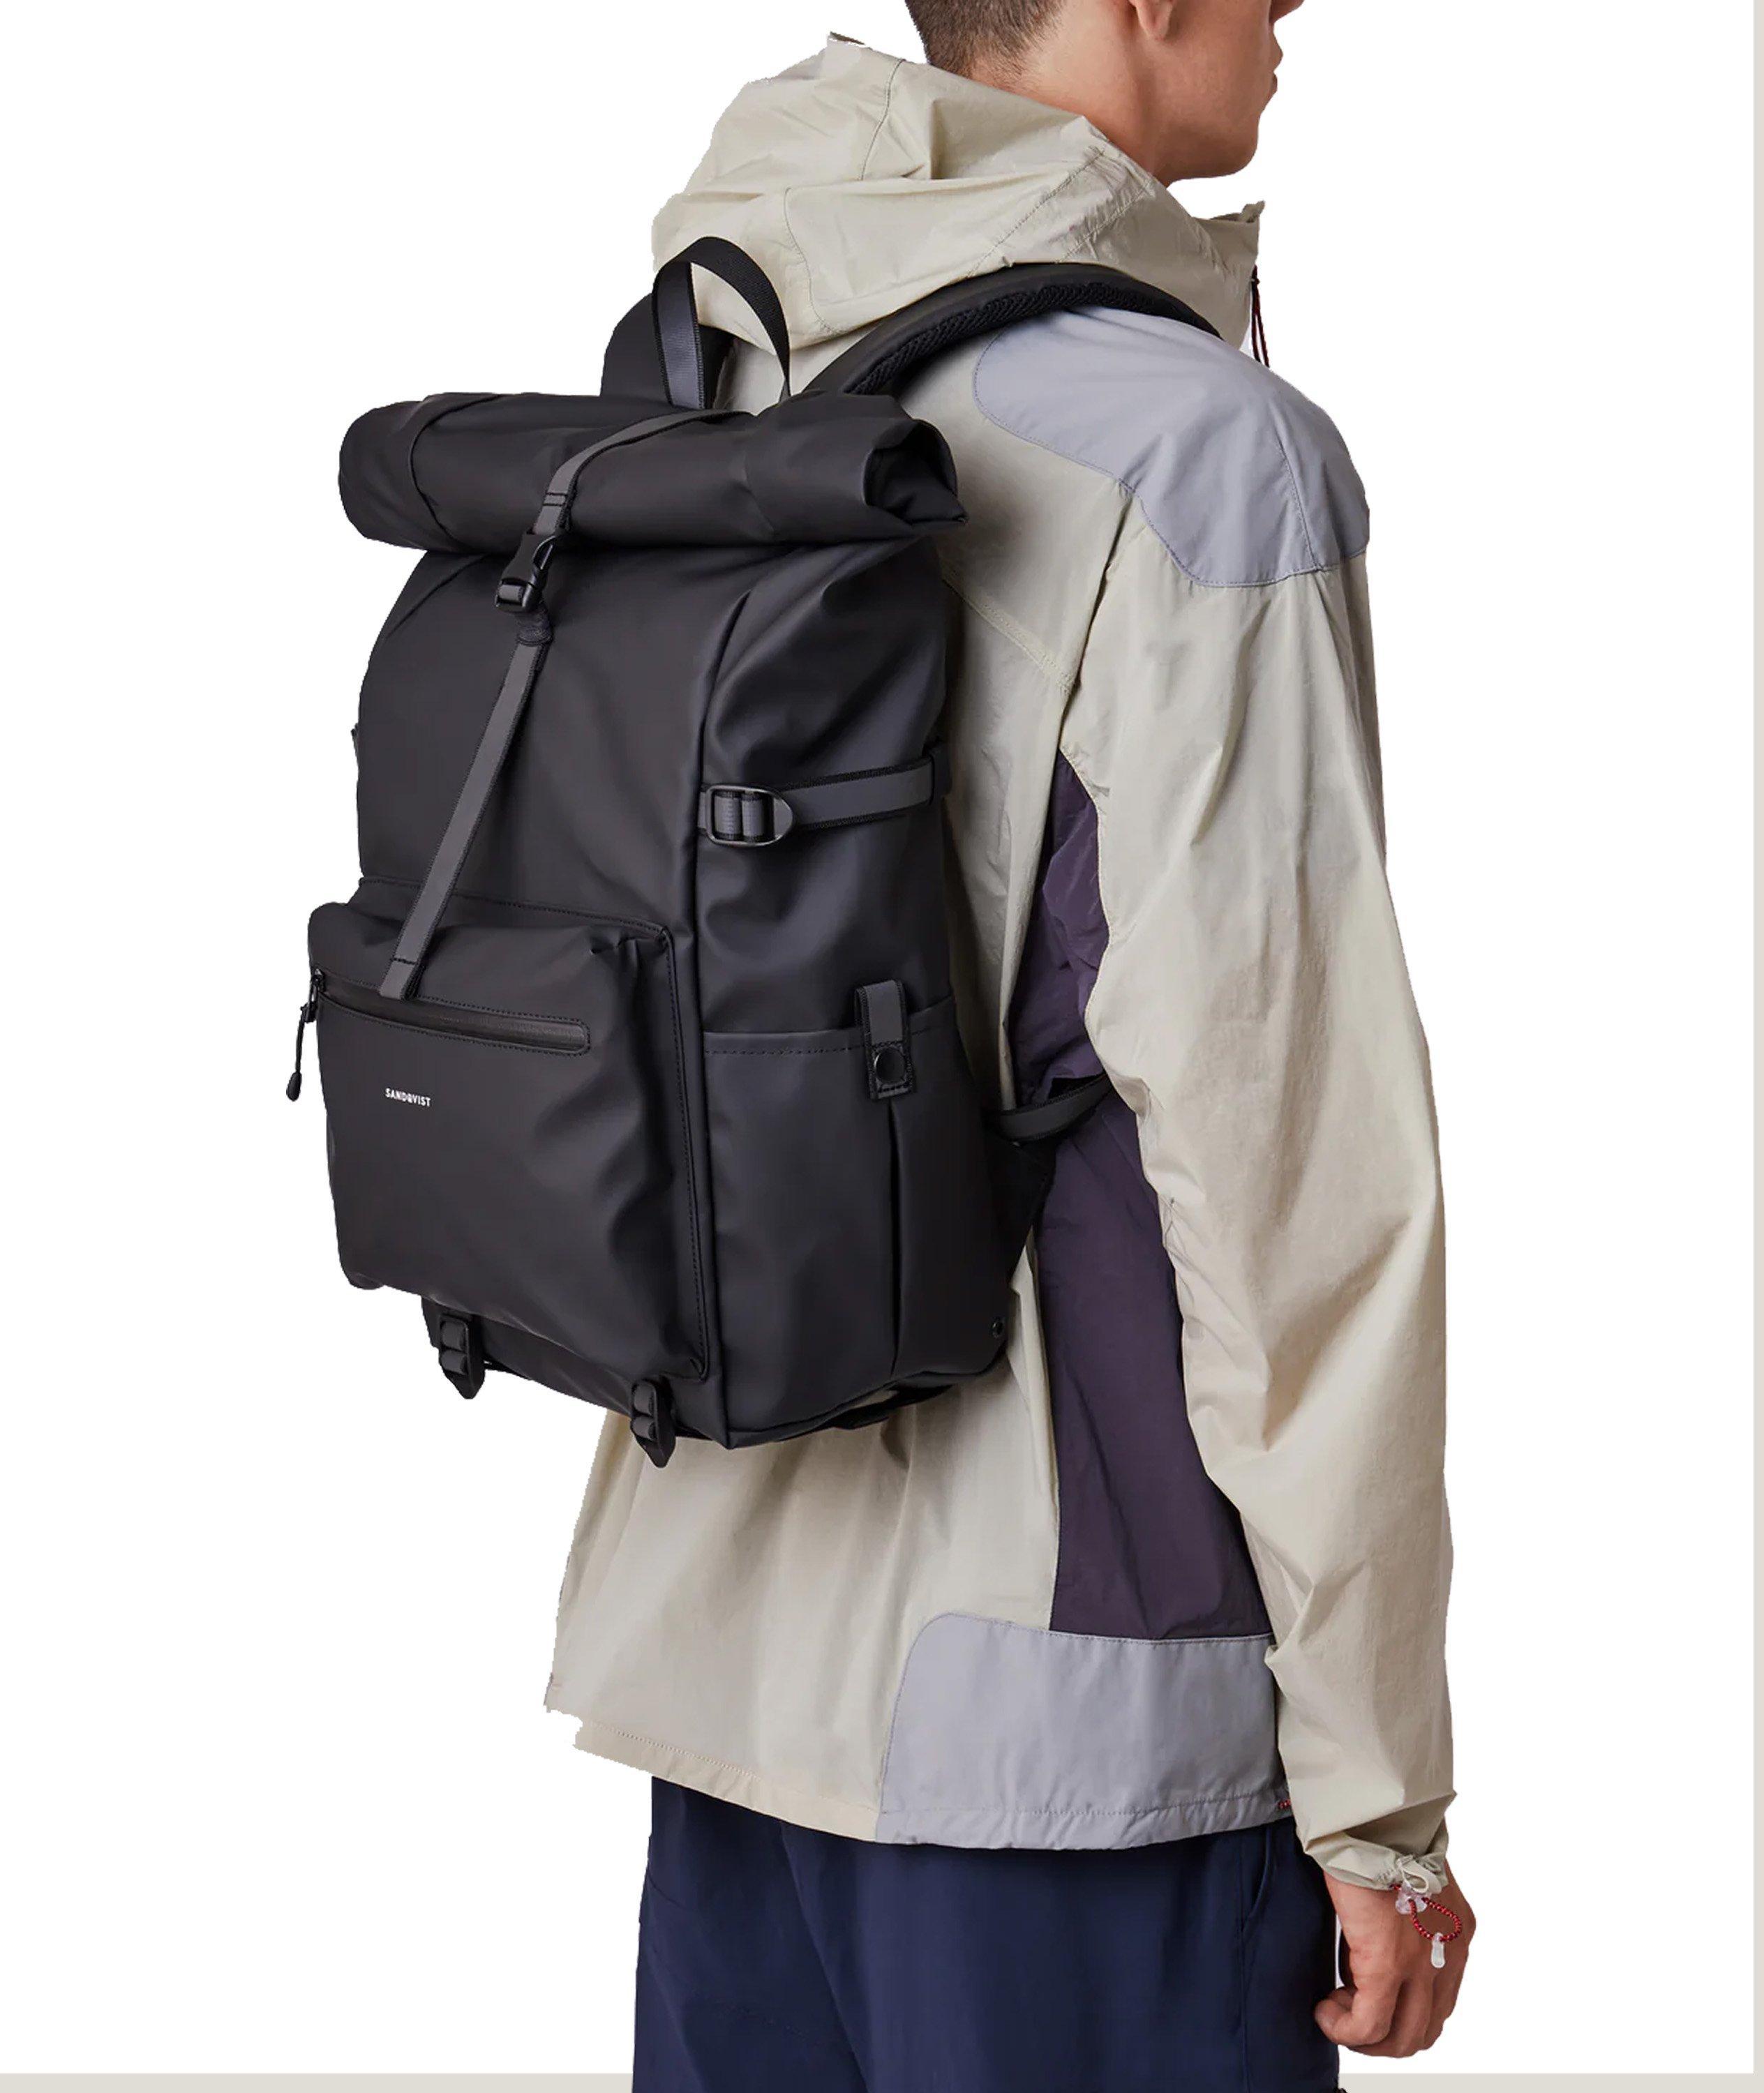 Stream Collection Ruben 2.0 Rolltop Backpack  image 3